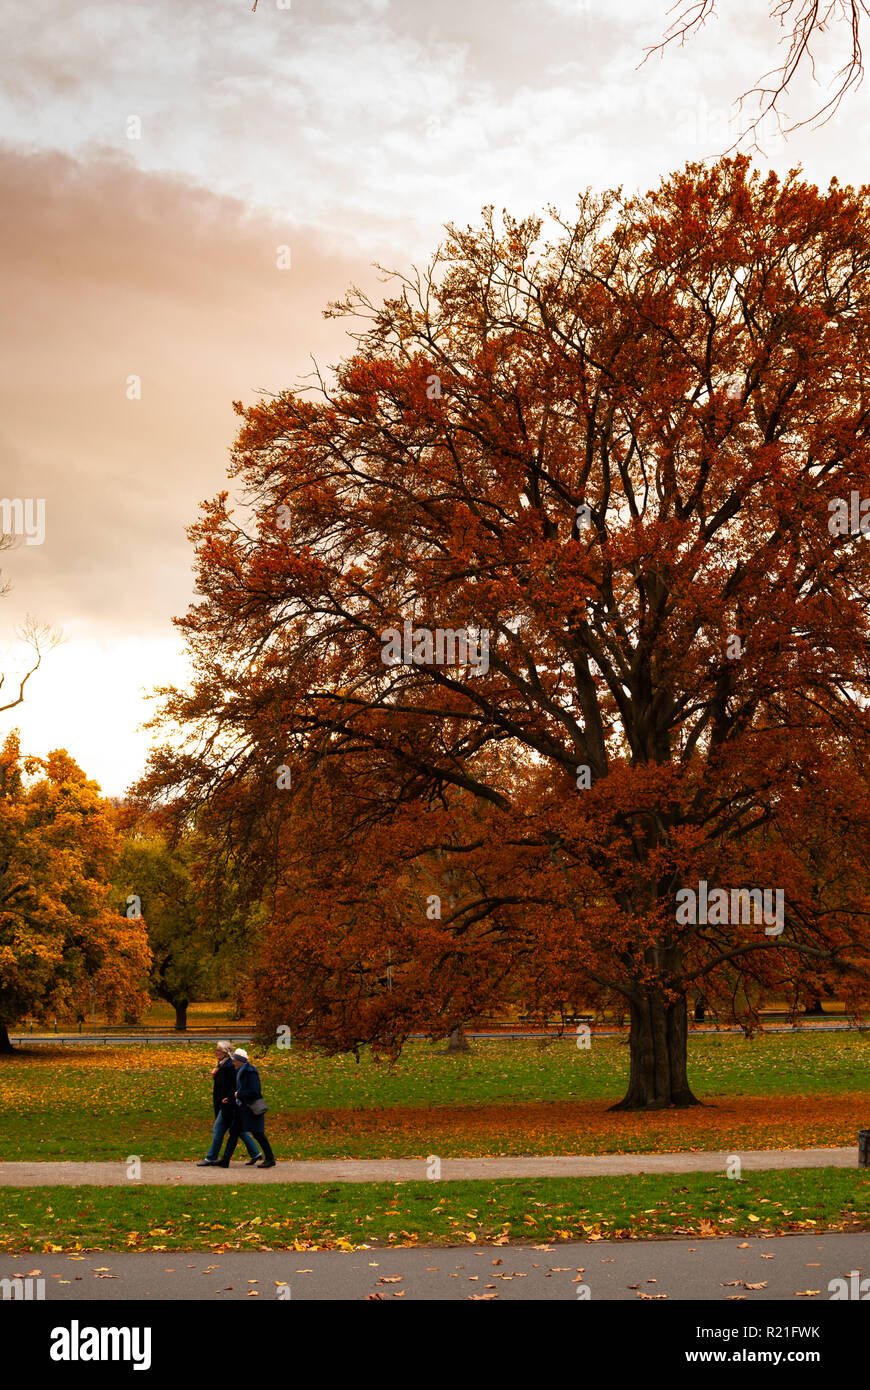 Two people walking in front of a big tree with red leaves in autumn on a green field Stock Photo